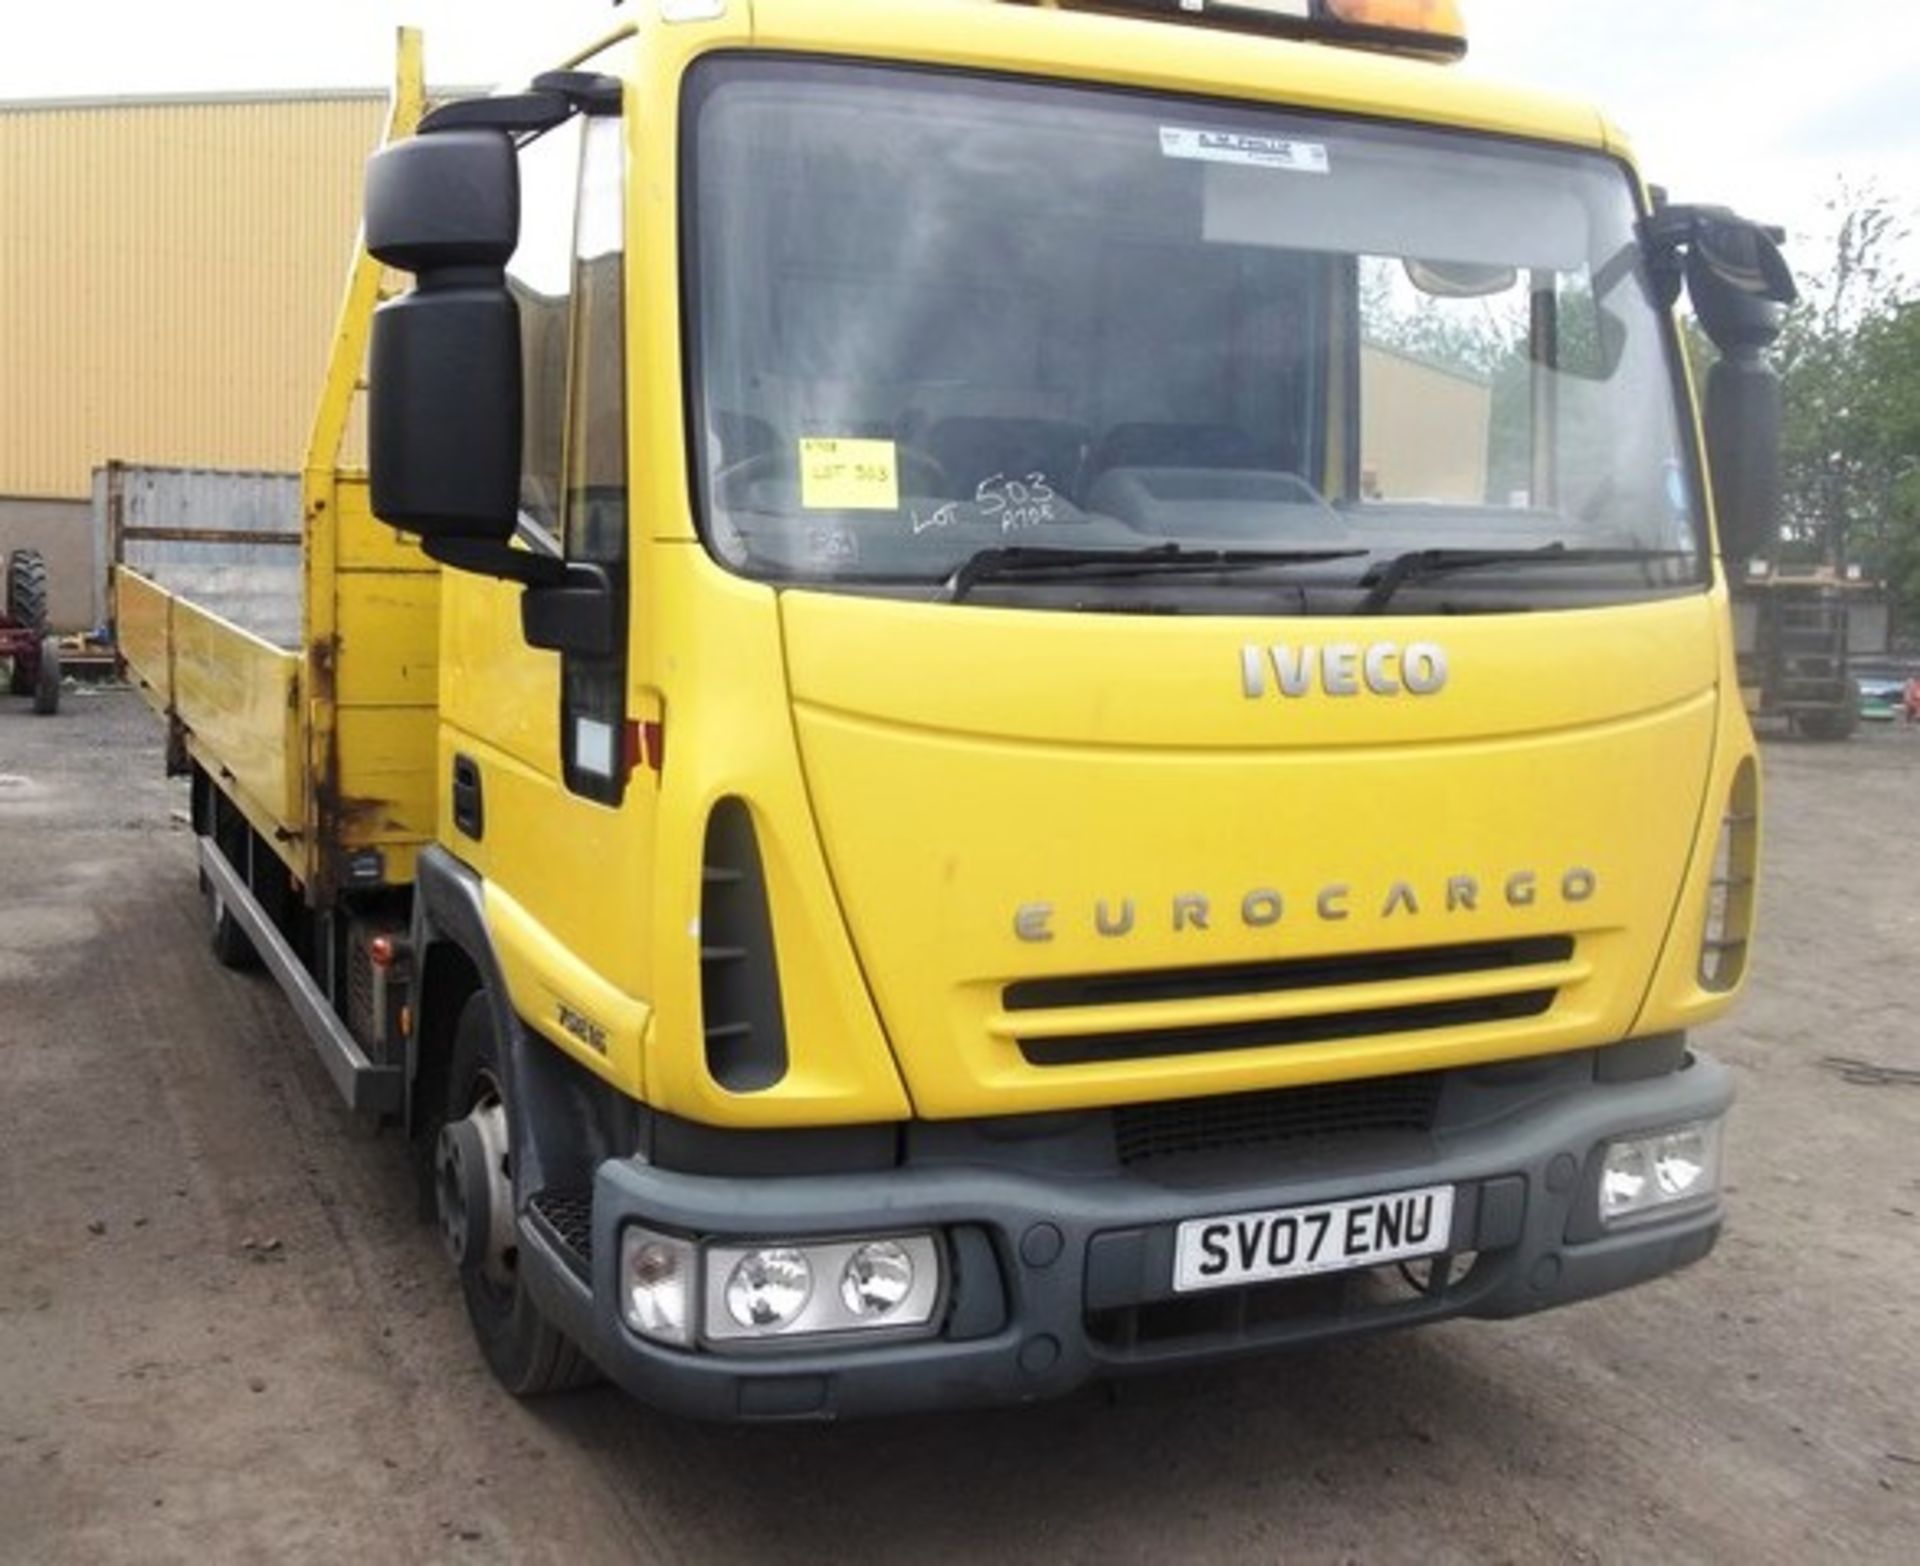 IVECO EUROCARGO - 3920cc
Body: 2 Dr Truck
Color: White
First Reg: 01/06/2007
Doors: 2
MOT: 31/01/ - Image 6 of 7